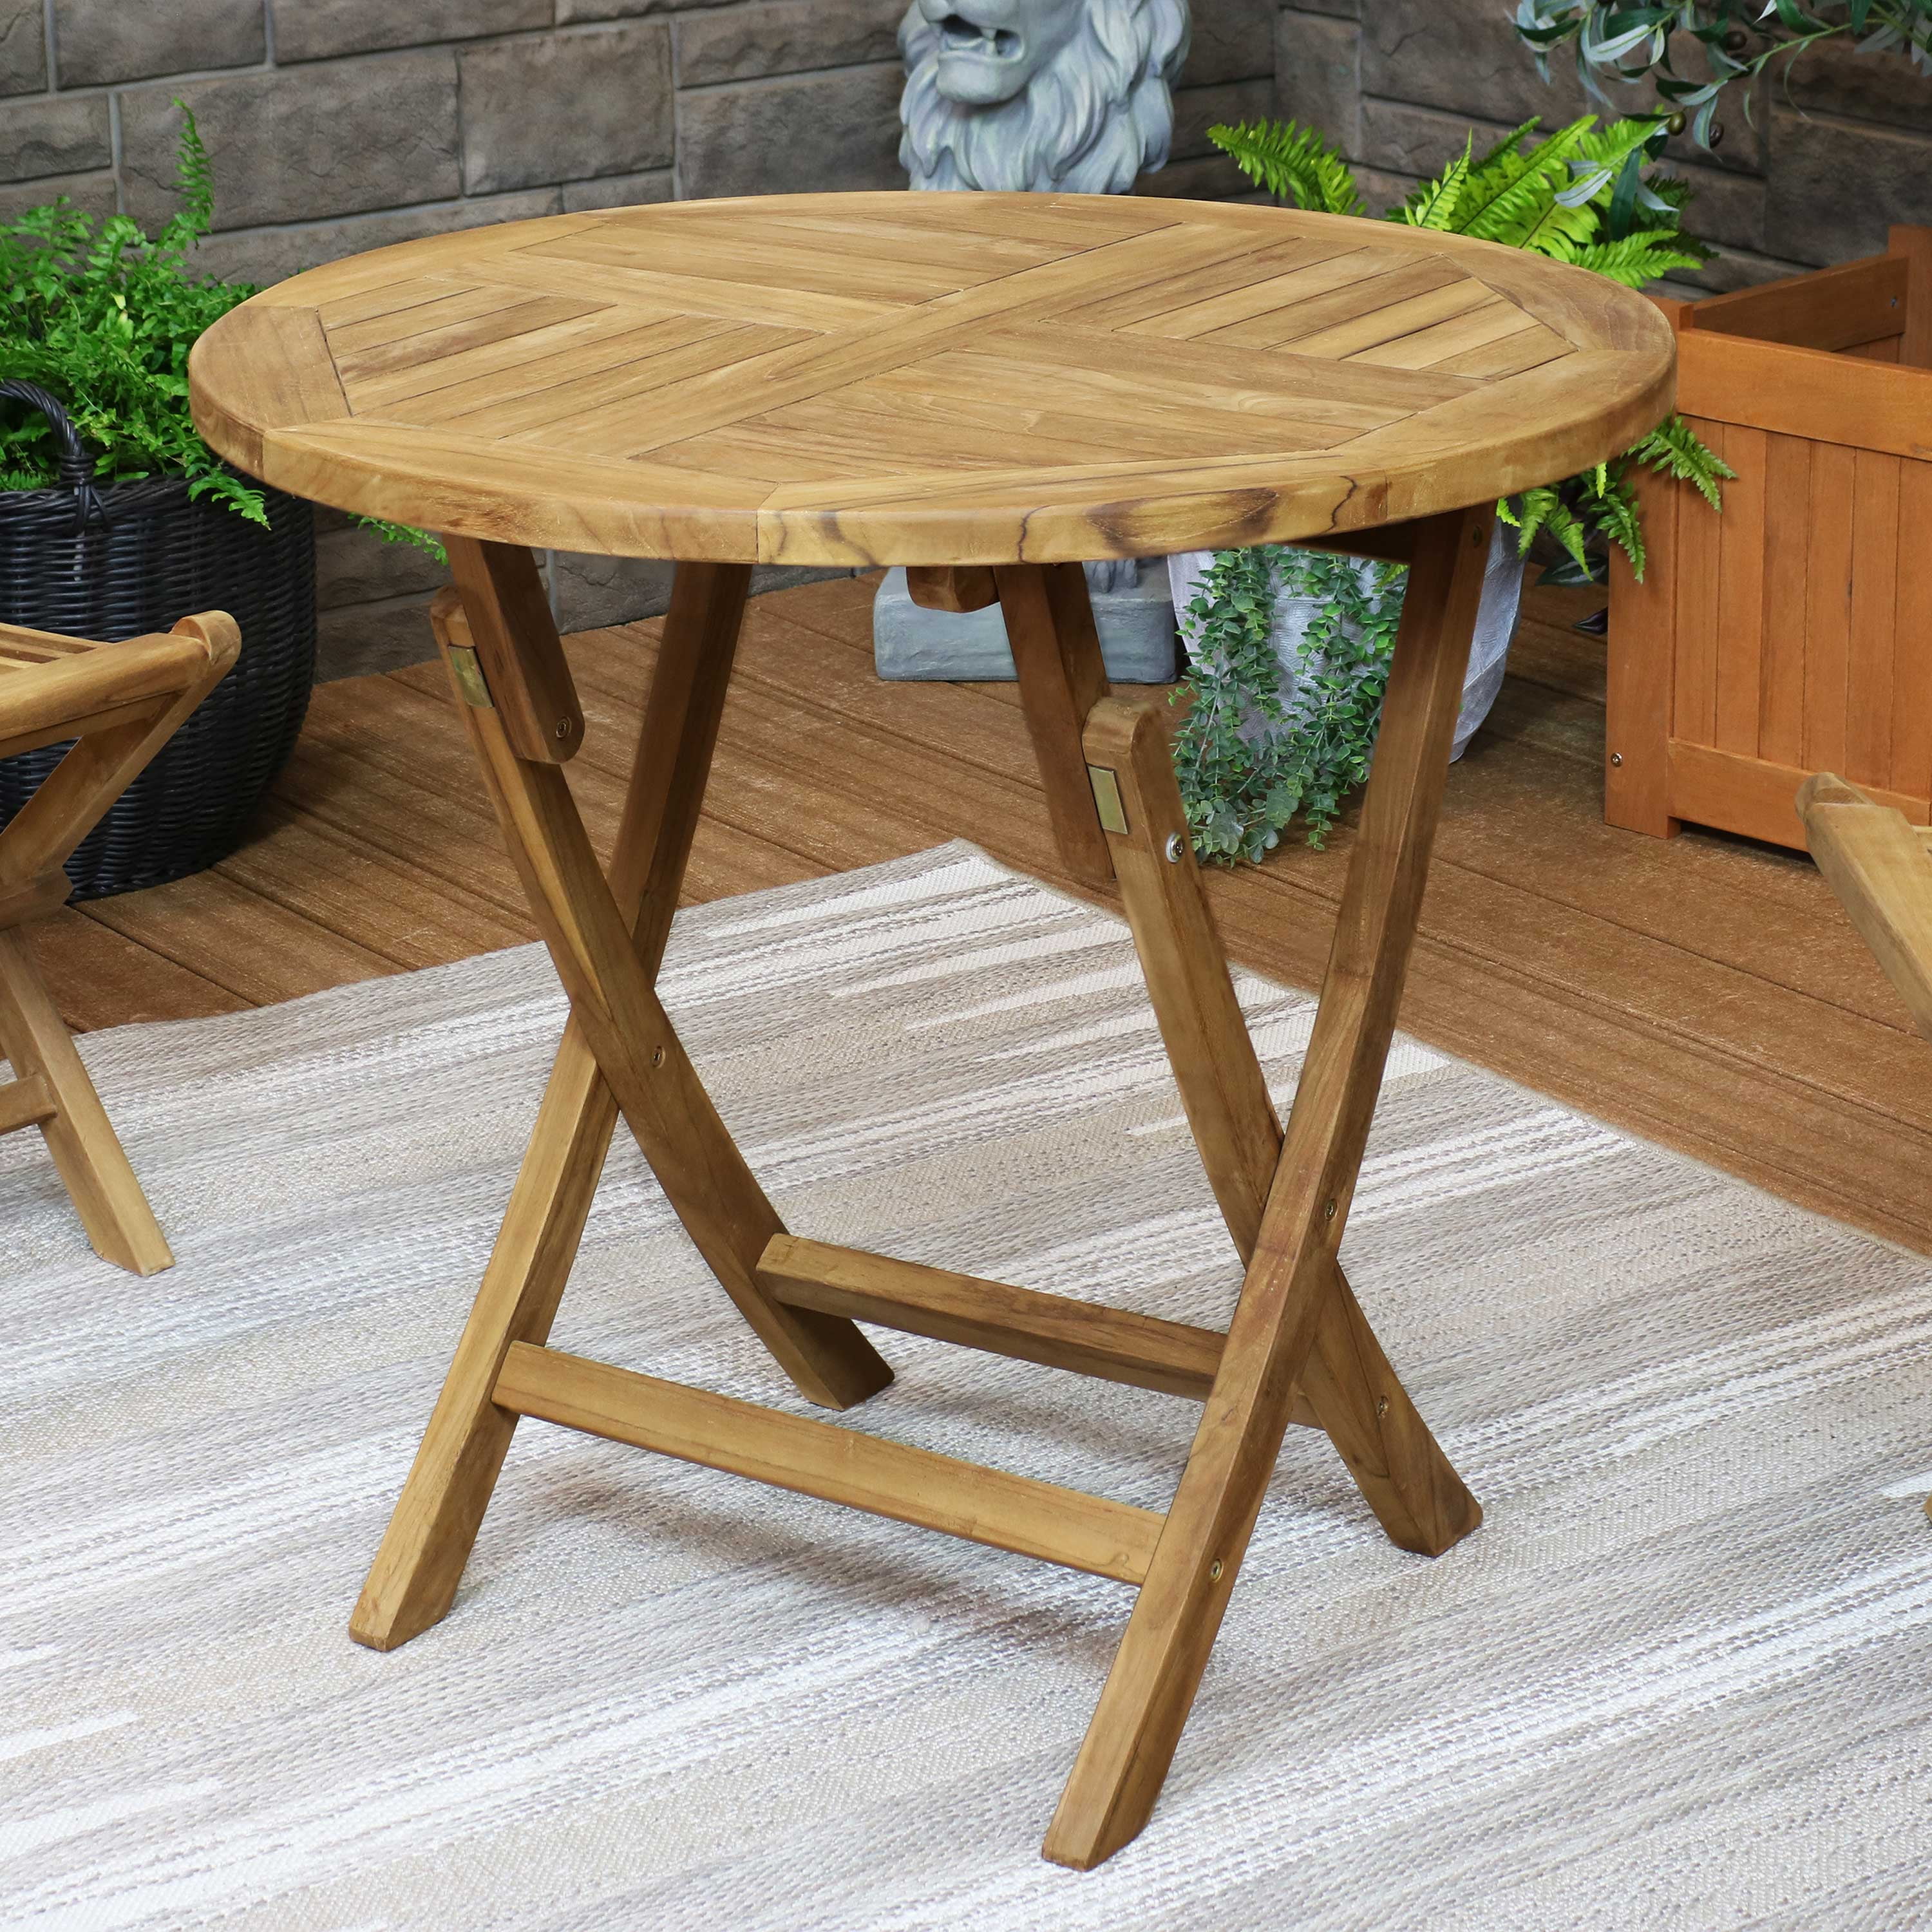 Small Teak Dining Table: Perfect For Compact Spaces